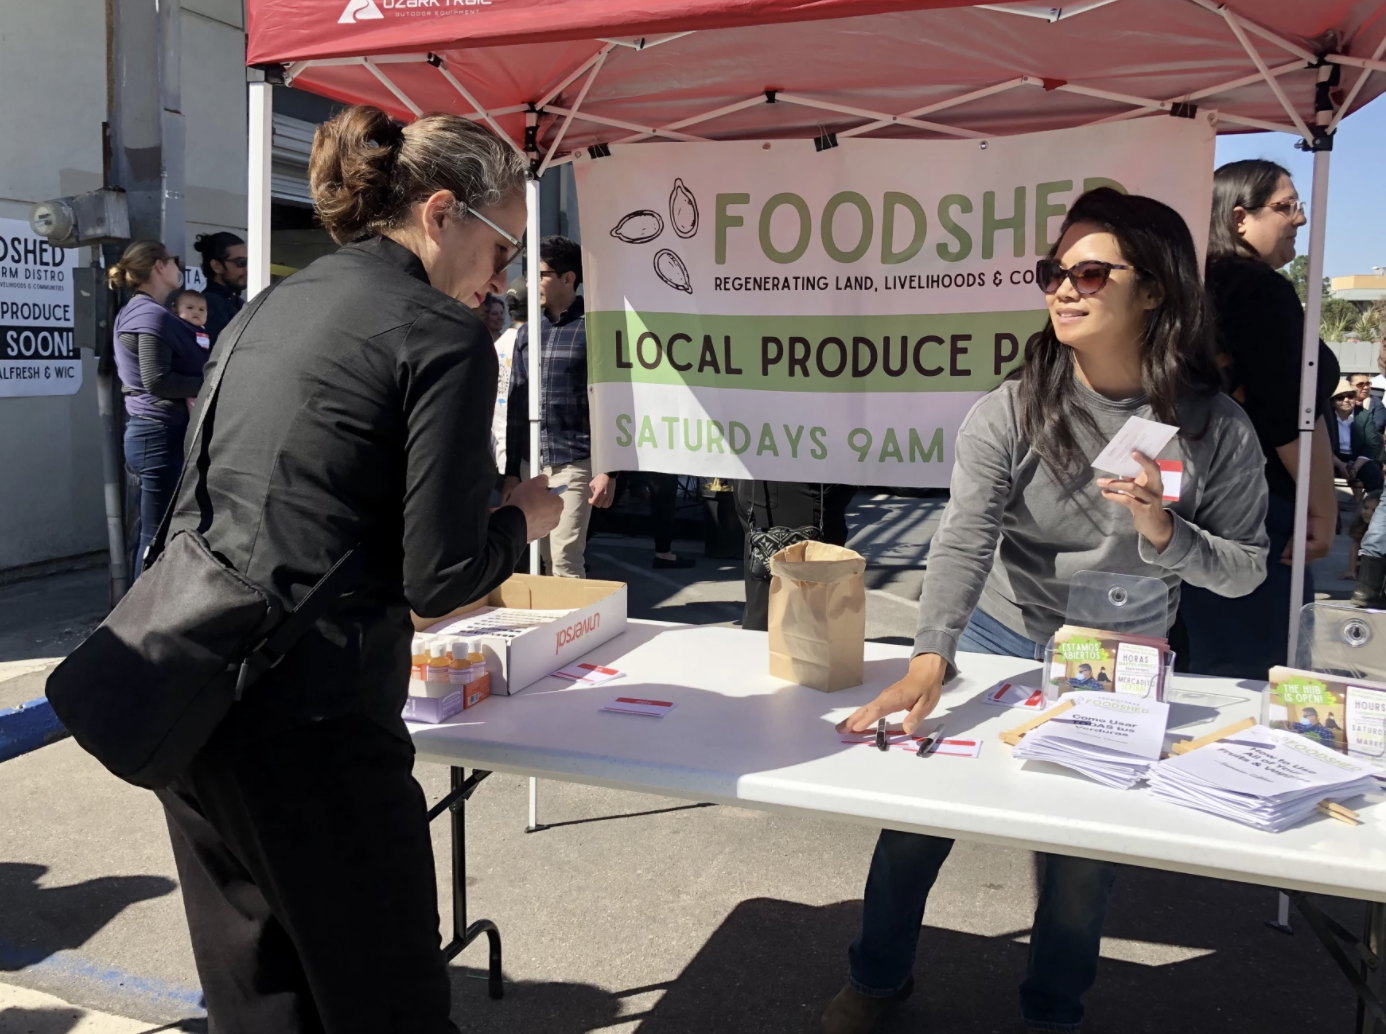 Bringing the farm and Foodshed to City Heights